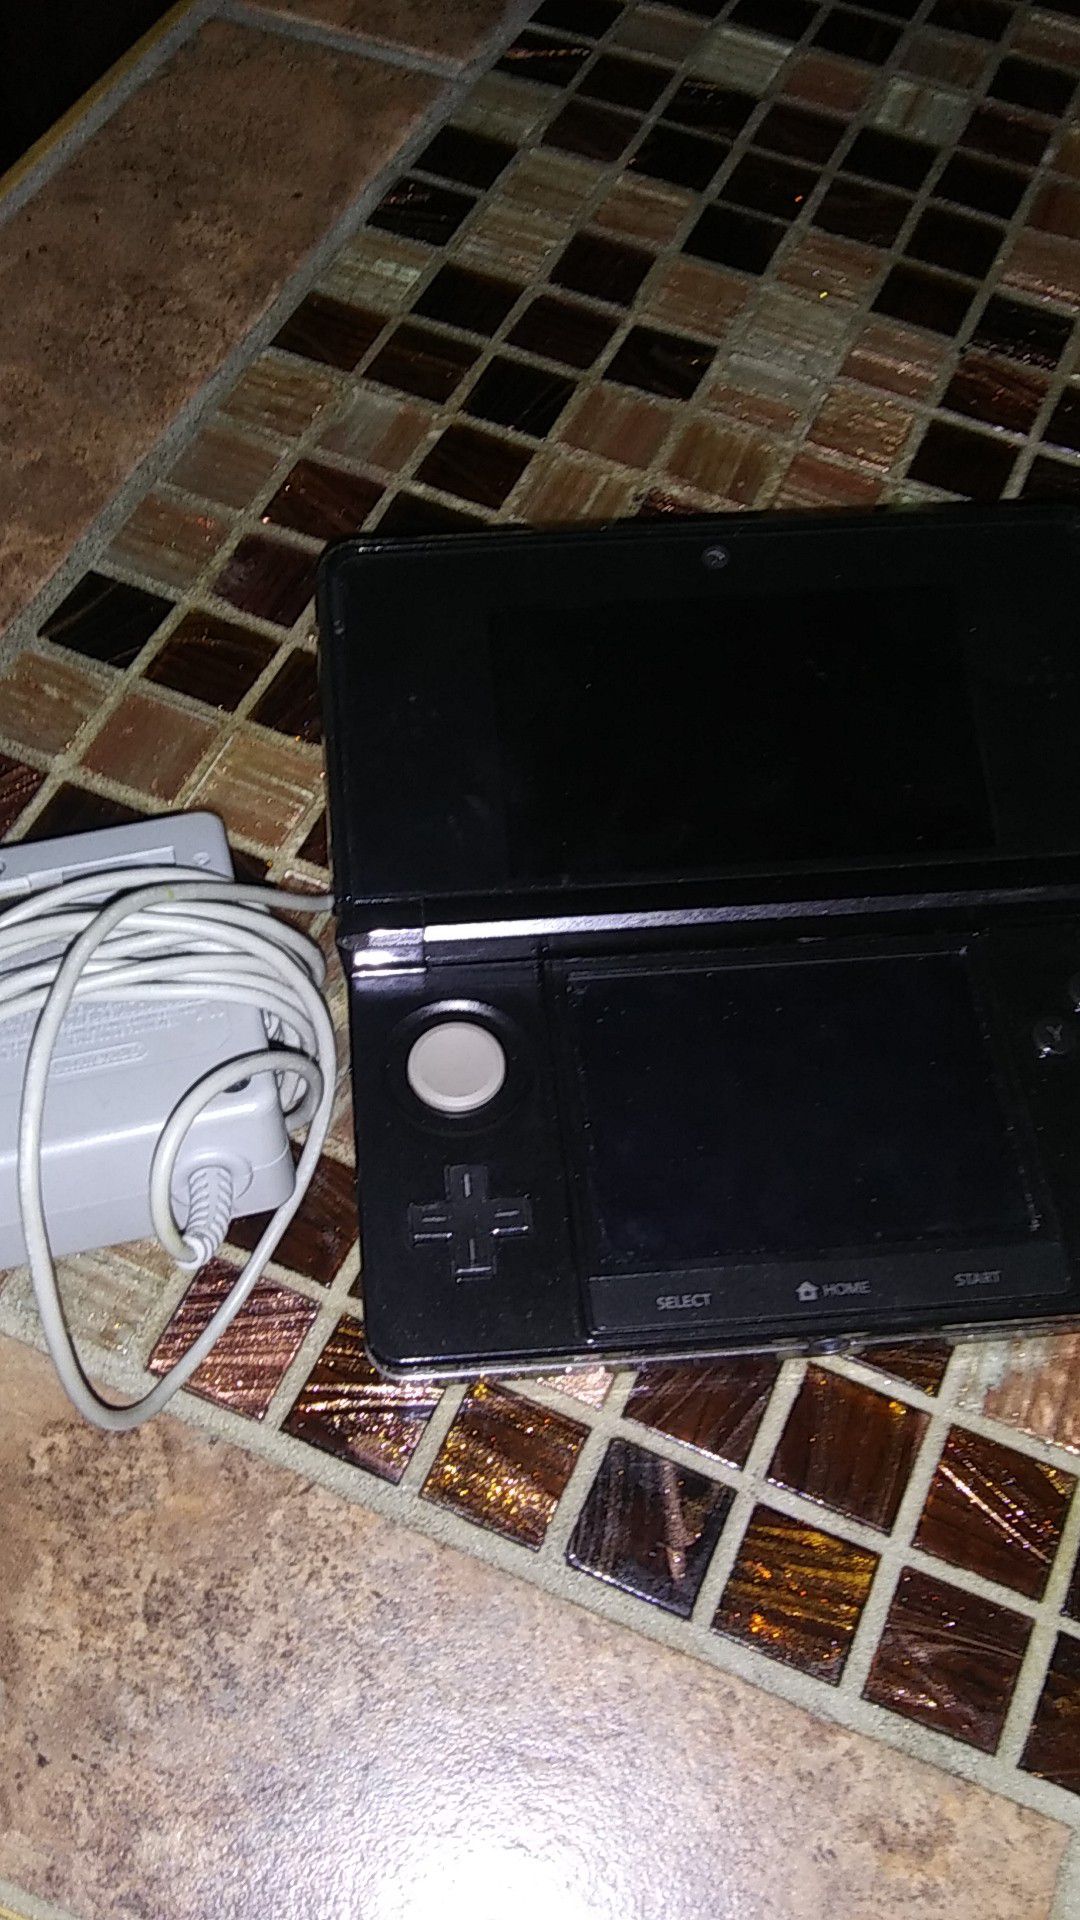 Nintendo 3ds with Mario and charger included